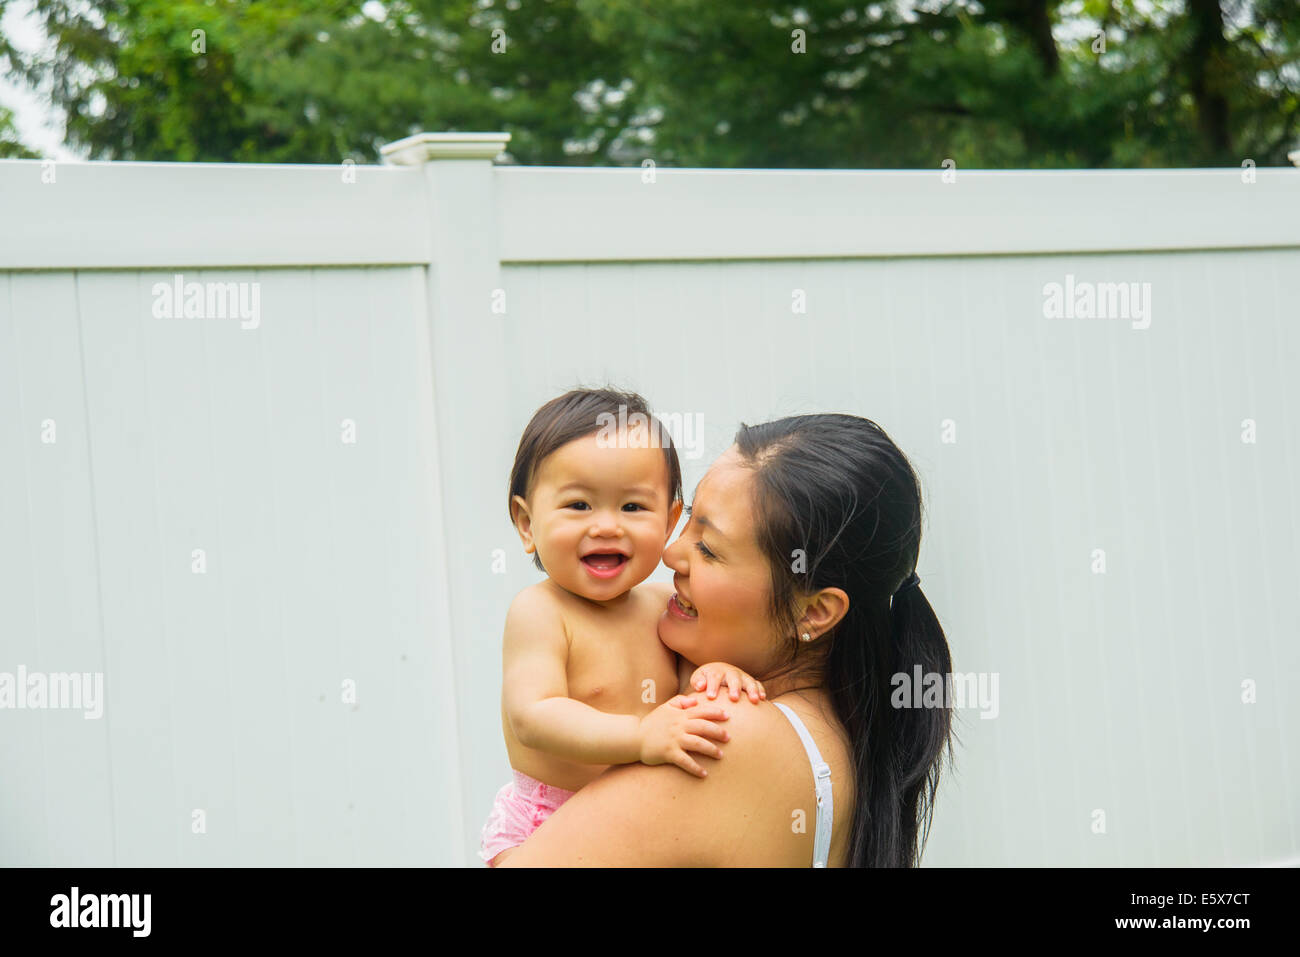 Portrait of mid adult mother and baby boy in garden Banque D'Images